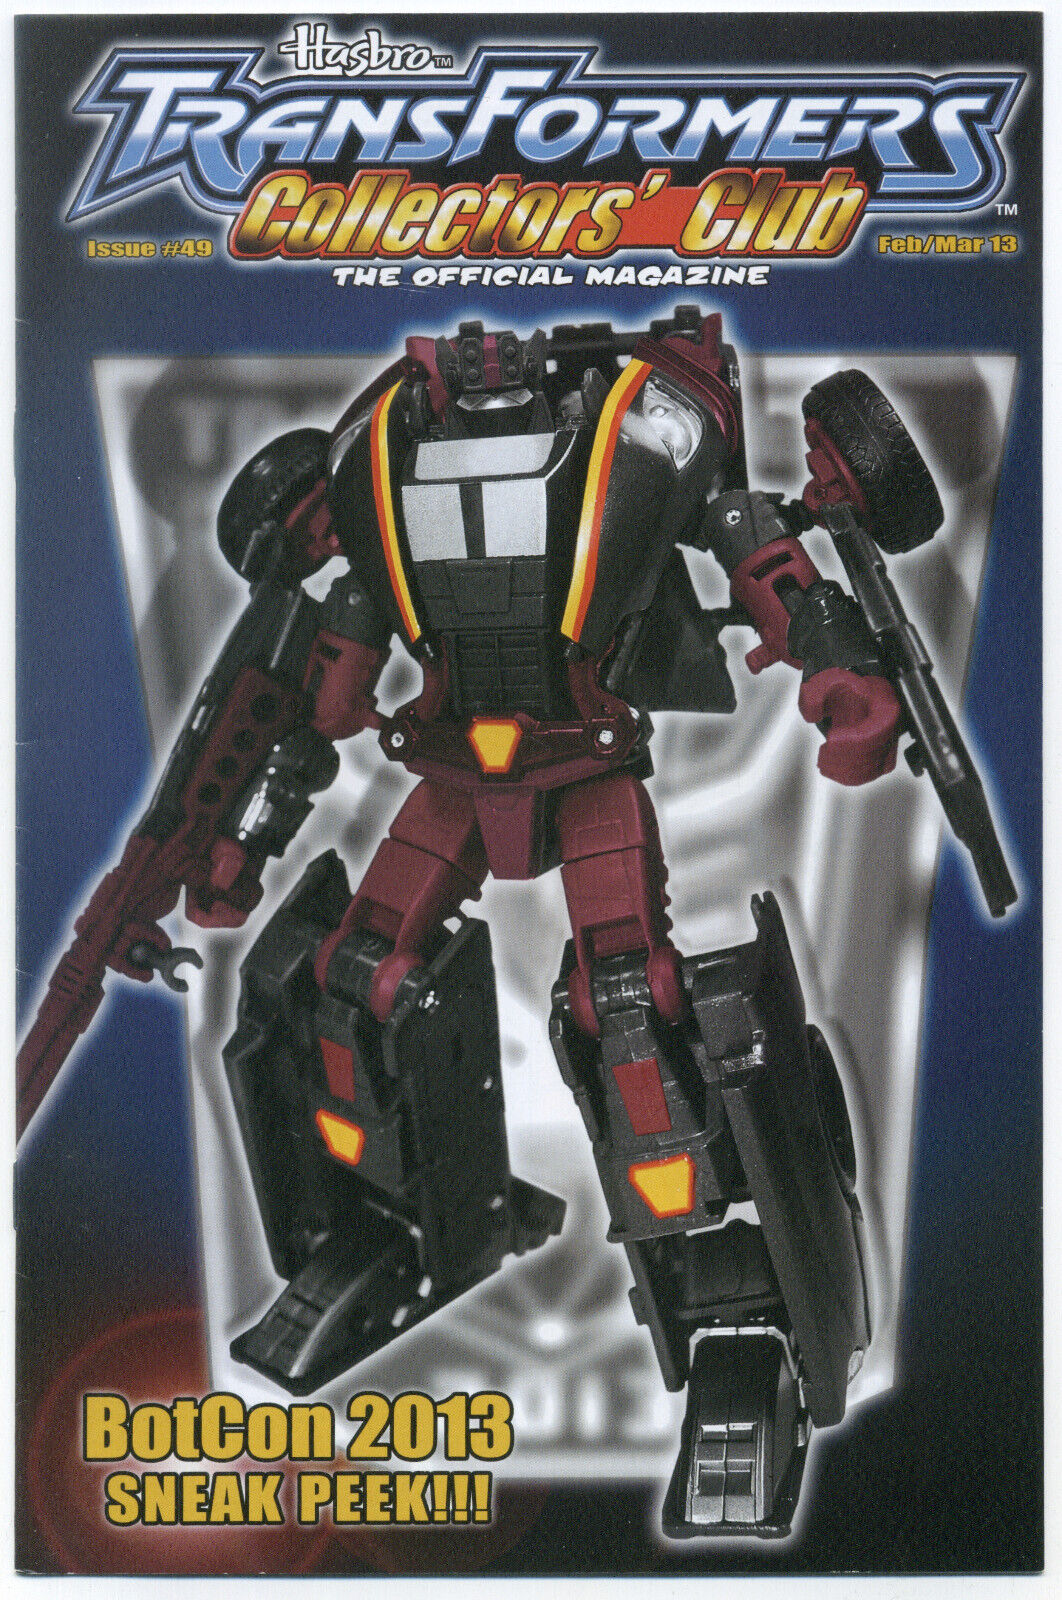 TRANSFORMERS COLLECTORS CLUB MAGAZINE #49 February March 2013